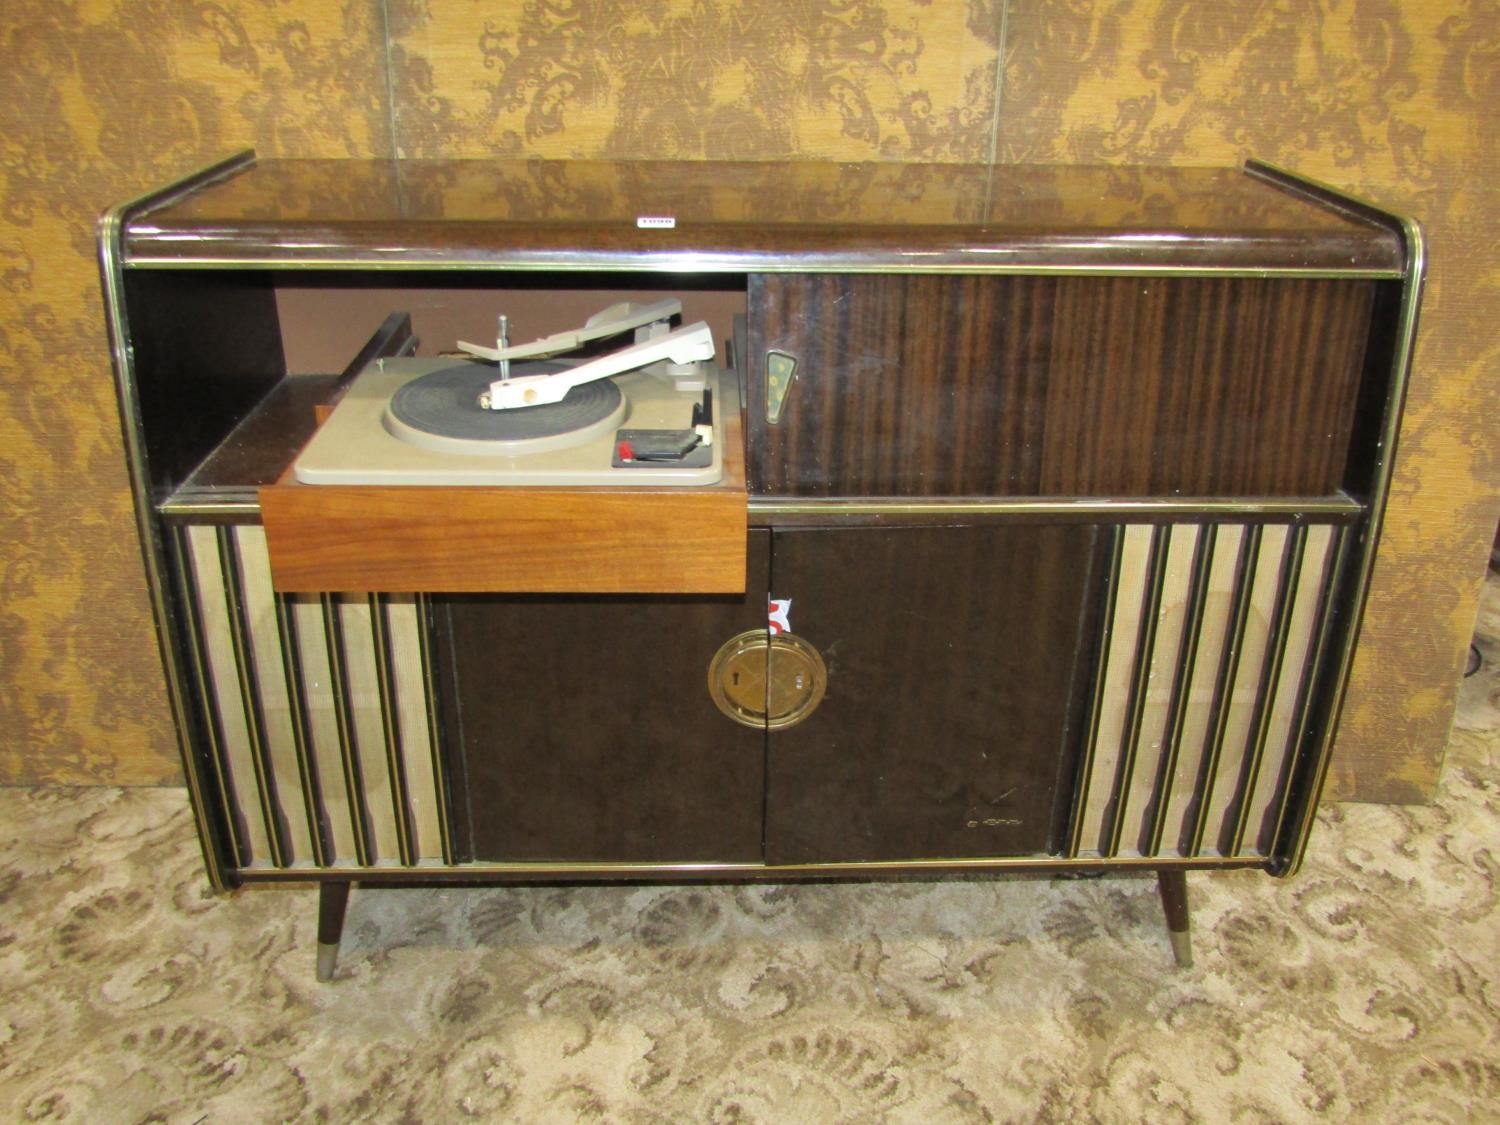 A mid-20th century floorstanding radiogram, Arkansas Deluxe with Garrard sliding turntable and - Image 5 of 8